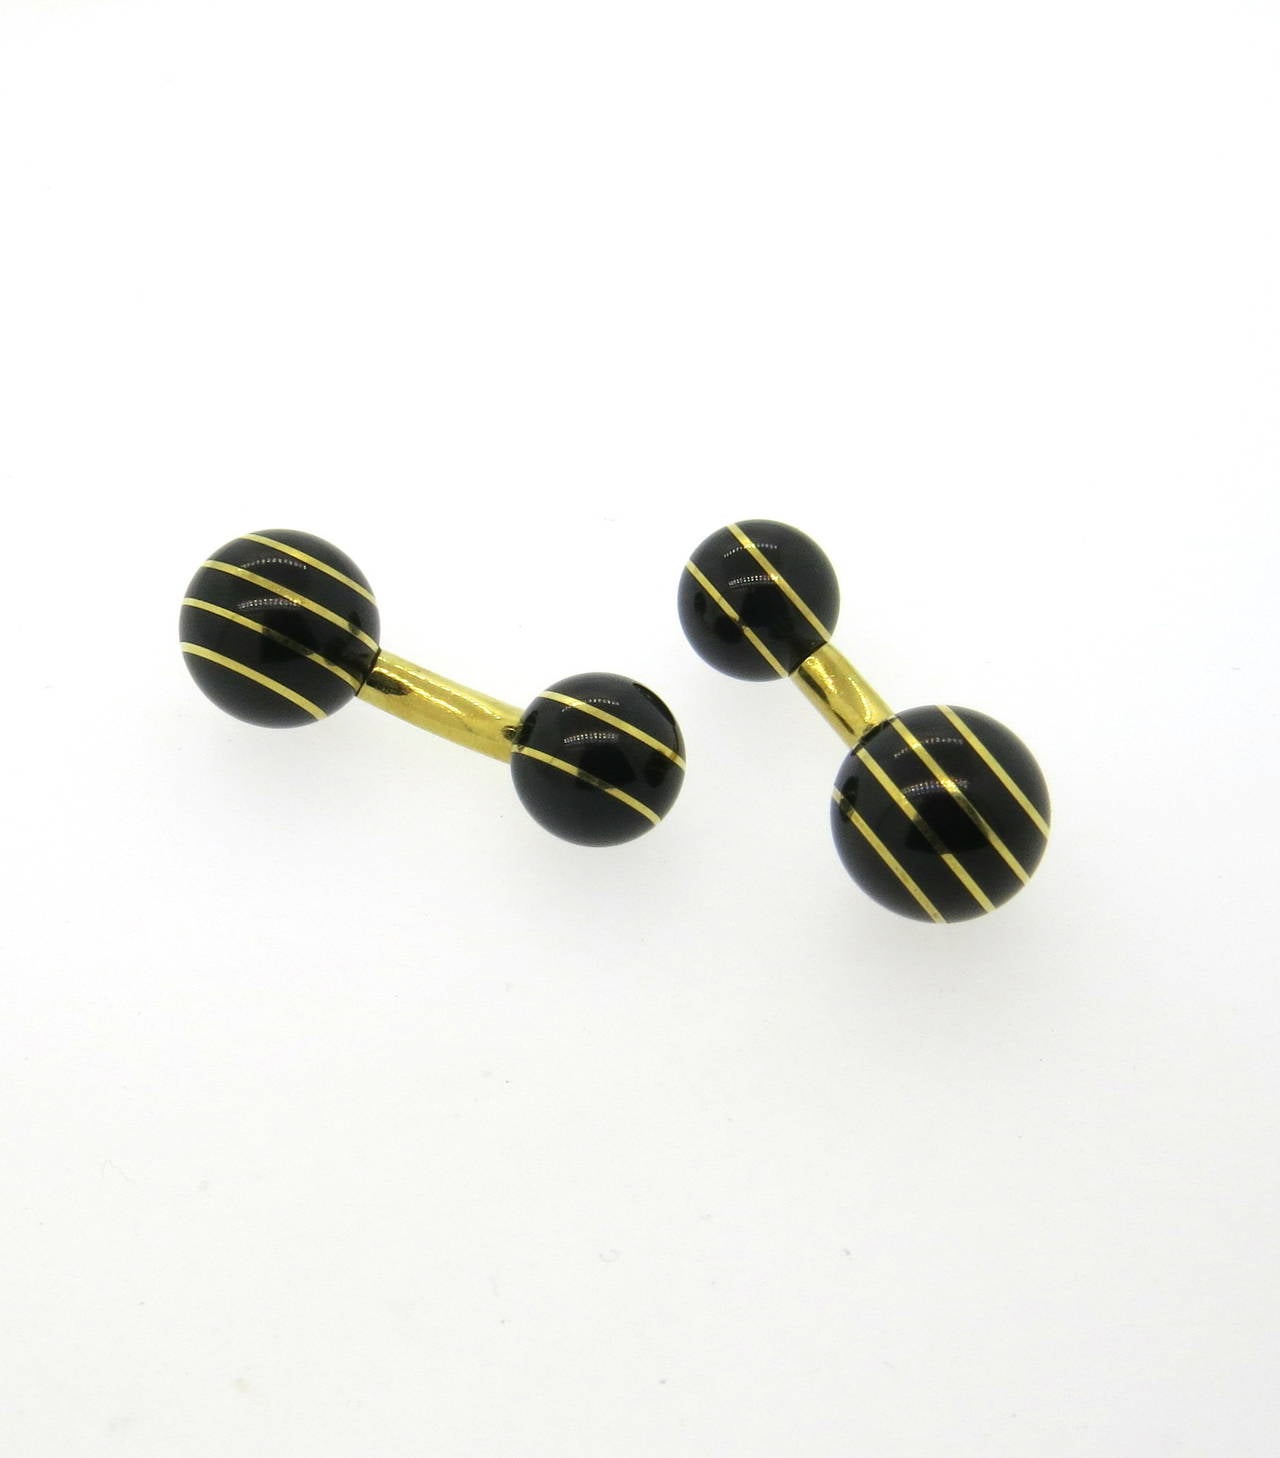 18k gold cufflinks, featuring black jade inlay balls. Balls measure 12mm (top) and 10mm (back) . Weight - 13.5 grams